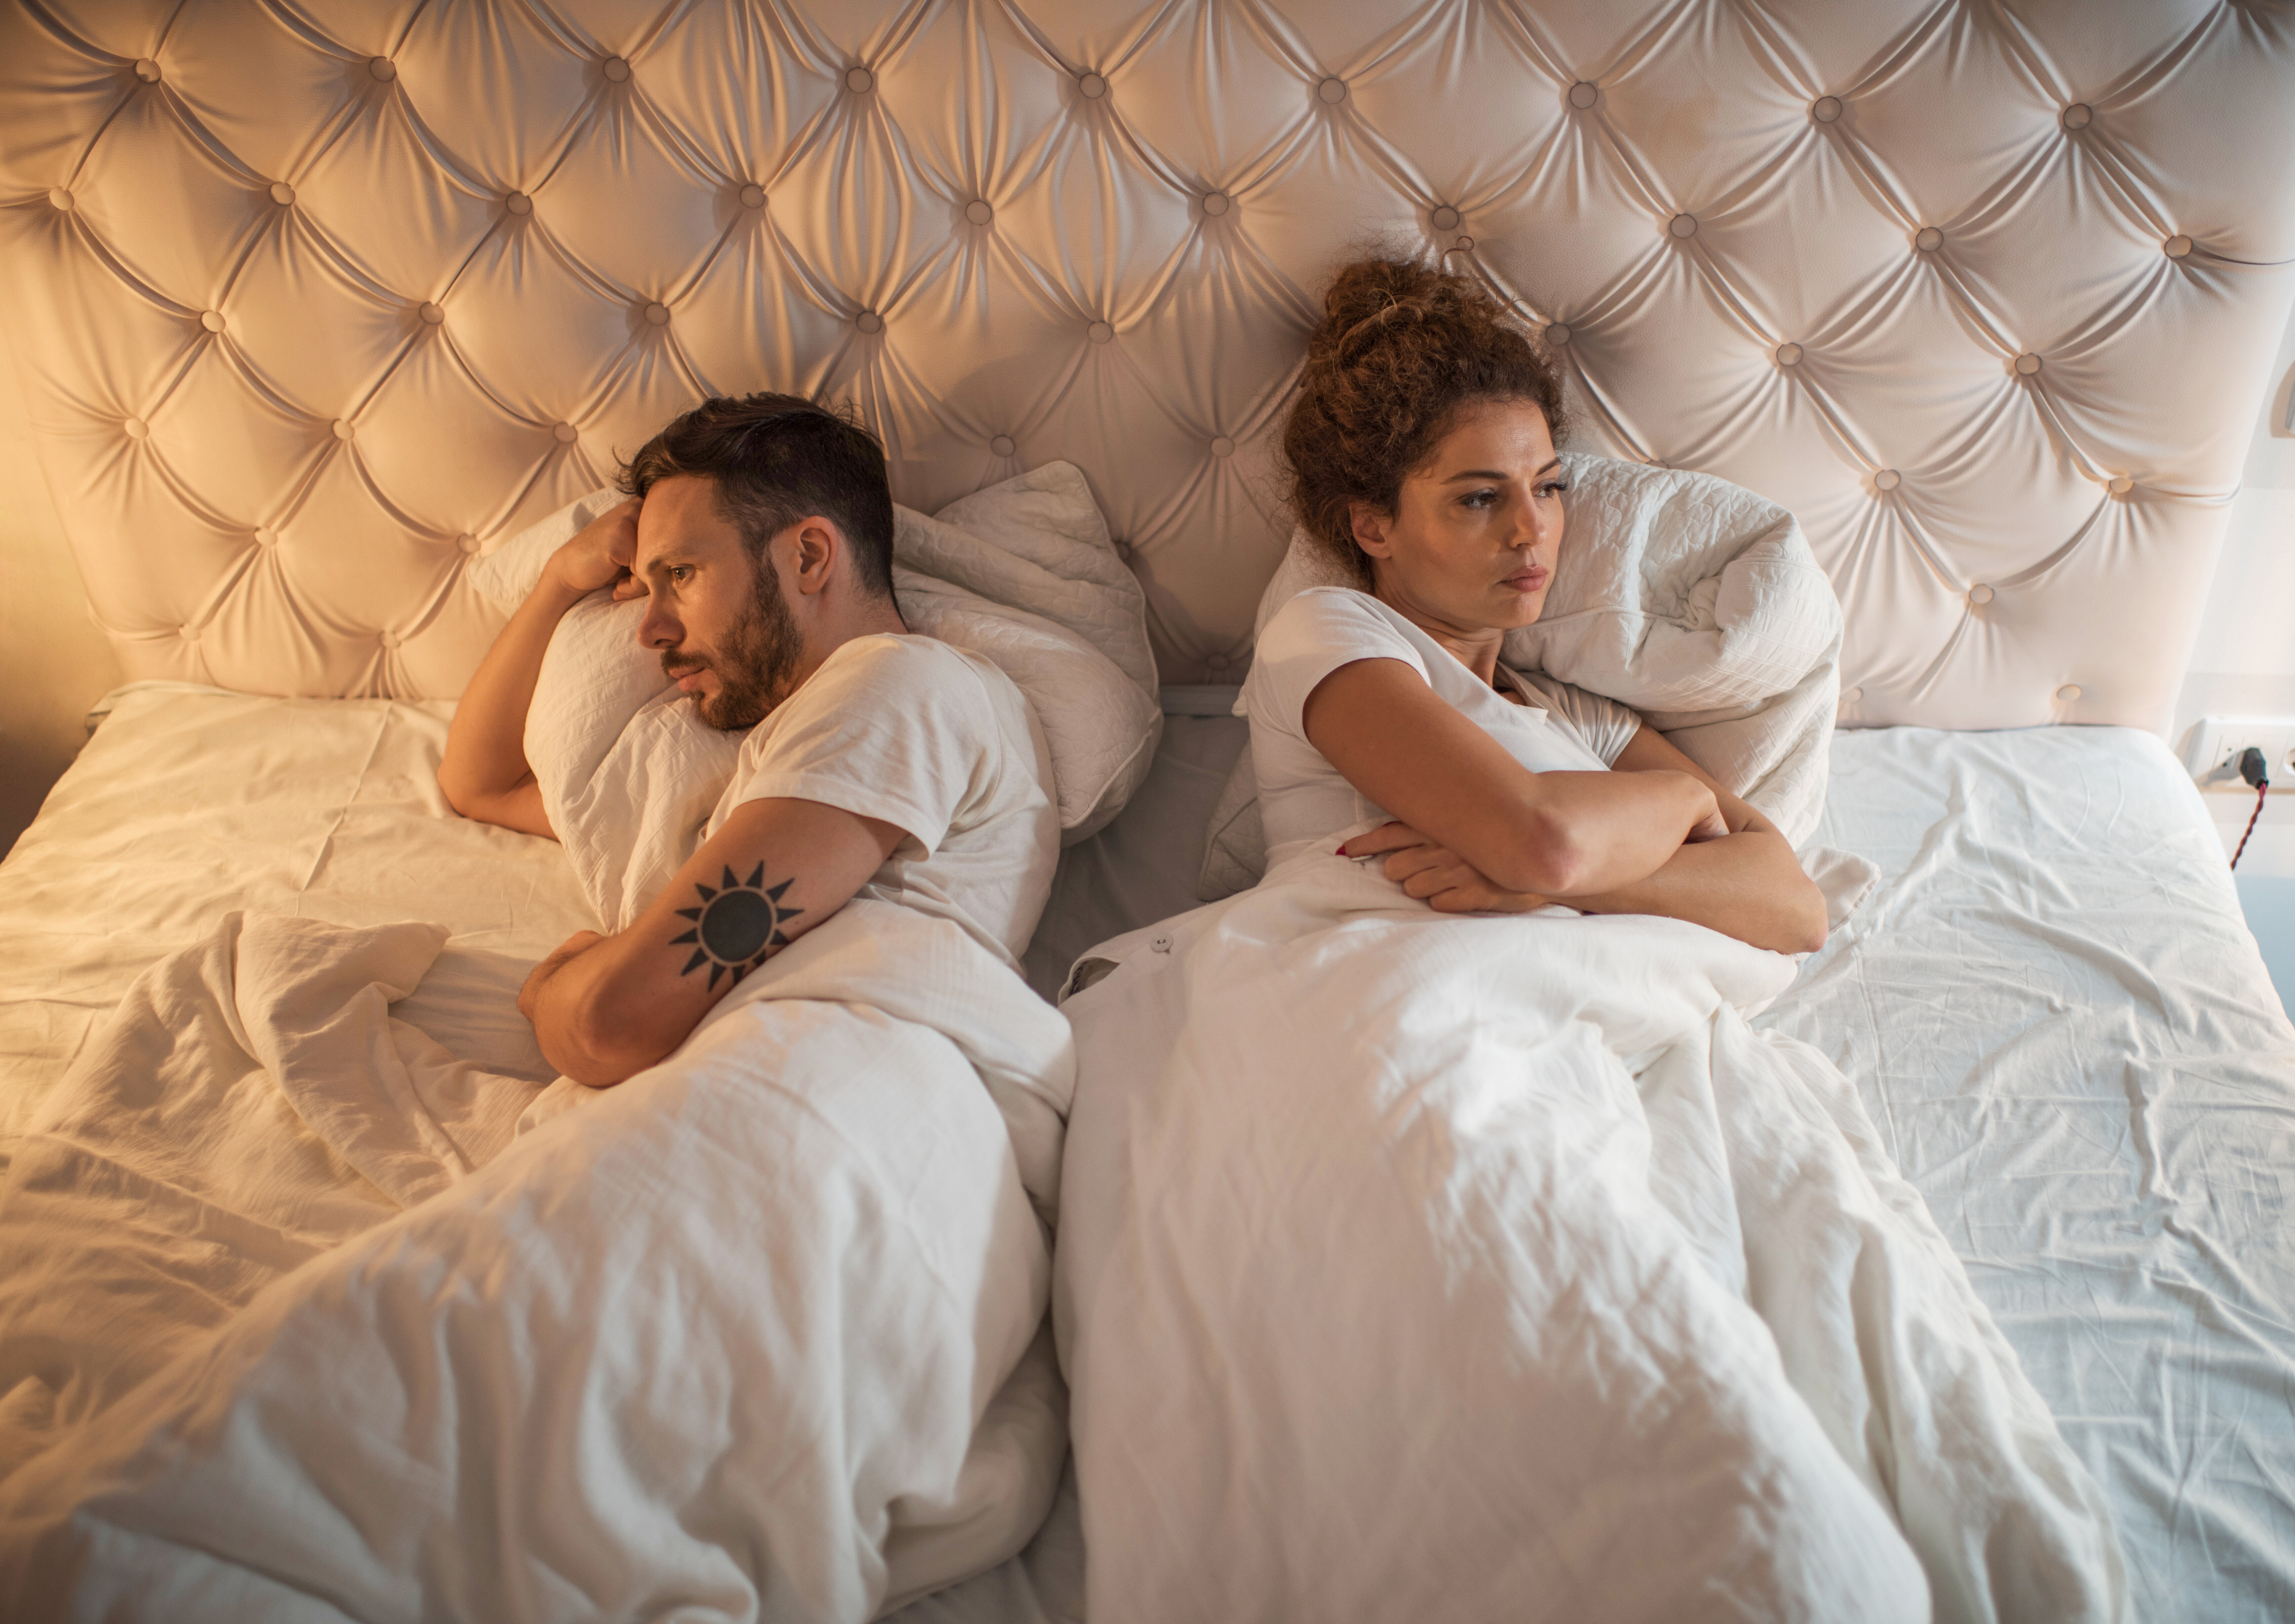 Two people lying in bed facing away from each other, appearing upset or in disagreement